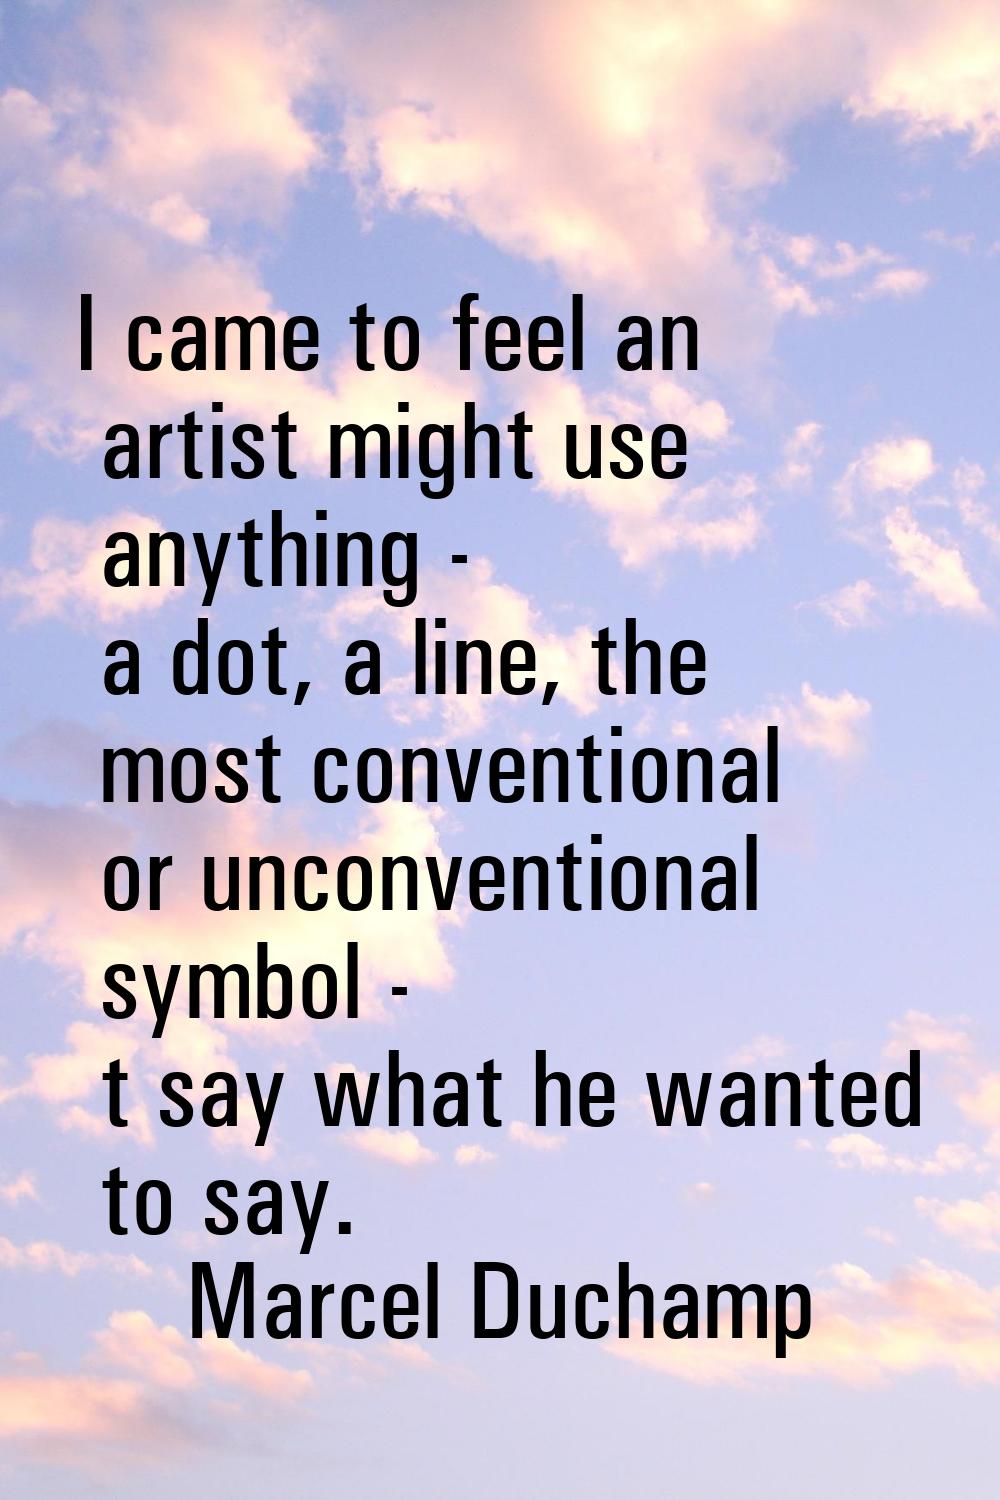 I came to feel an artist might use anything - a dot, a line, the most conventional or unconventiona